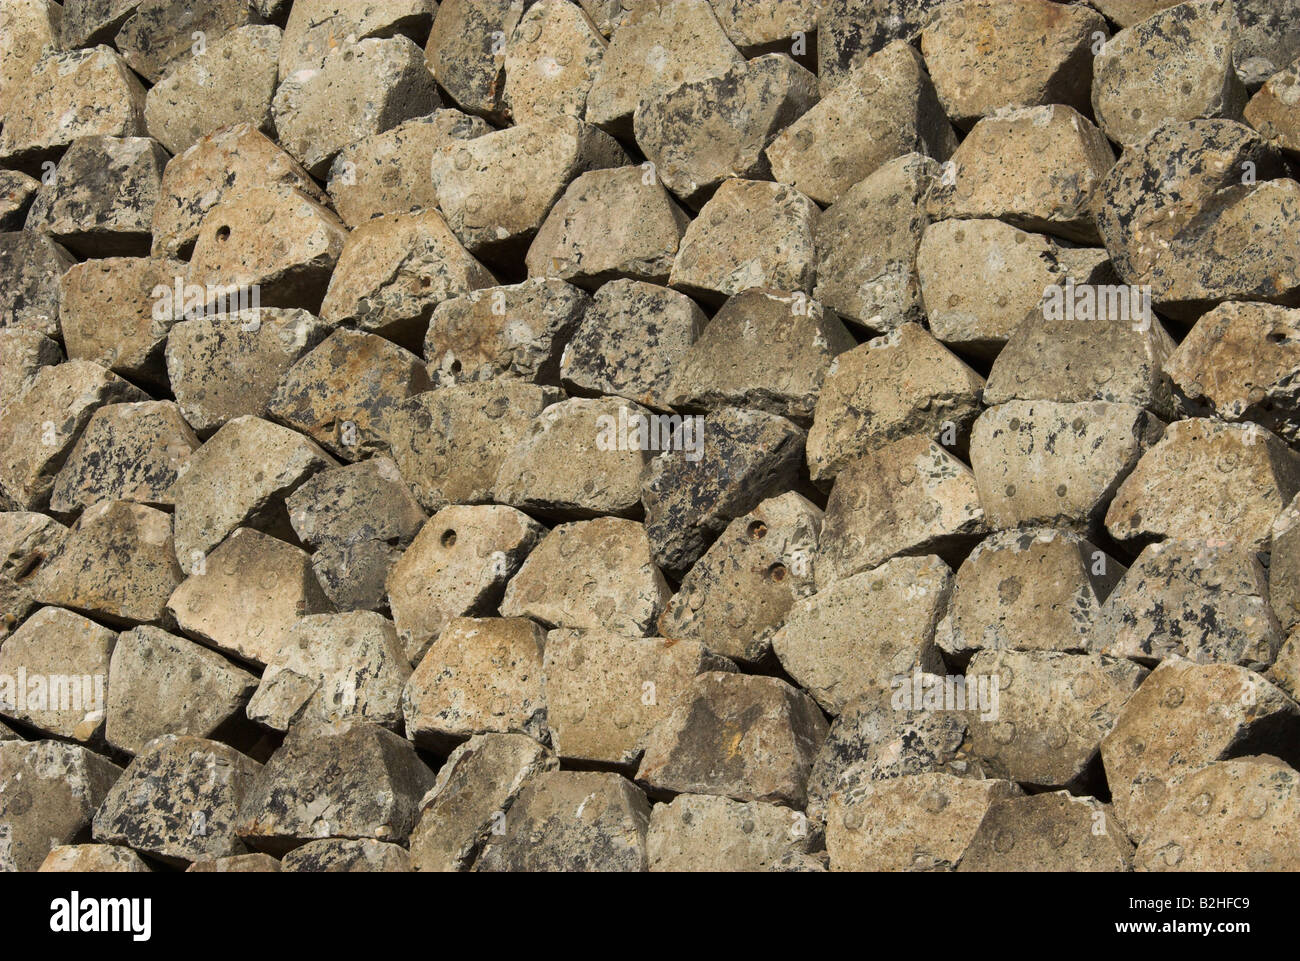 Beton figured patterned structure structures stacked Stock Photo